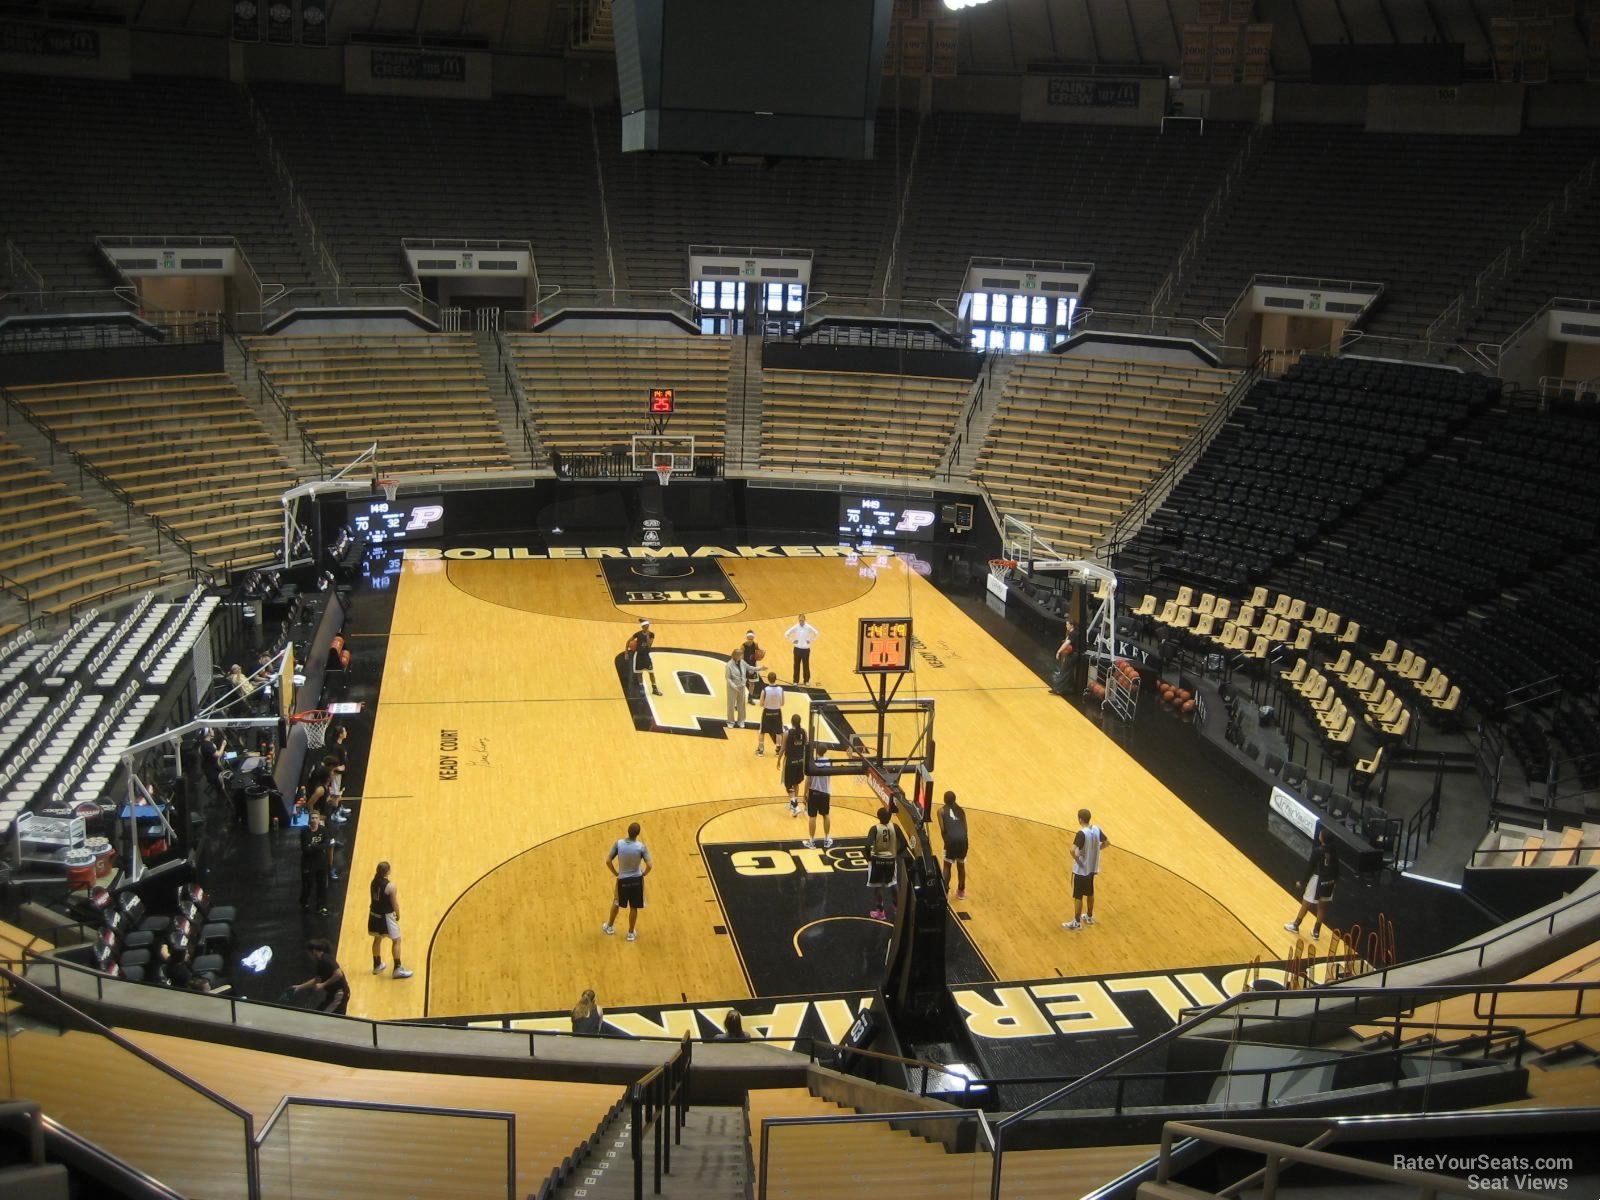 section 116, row 10 seat view  - mackey arena